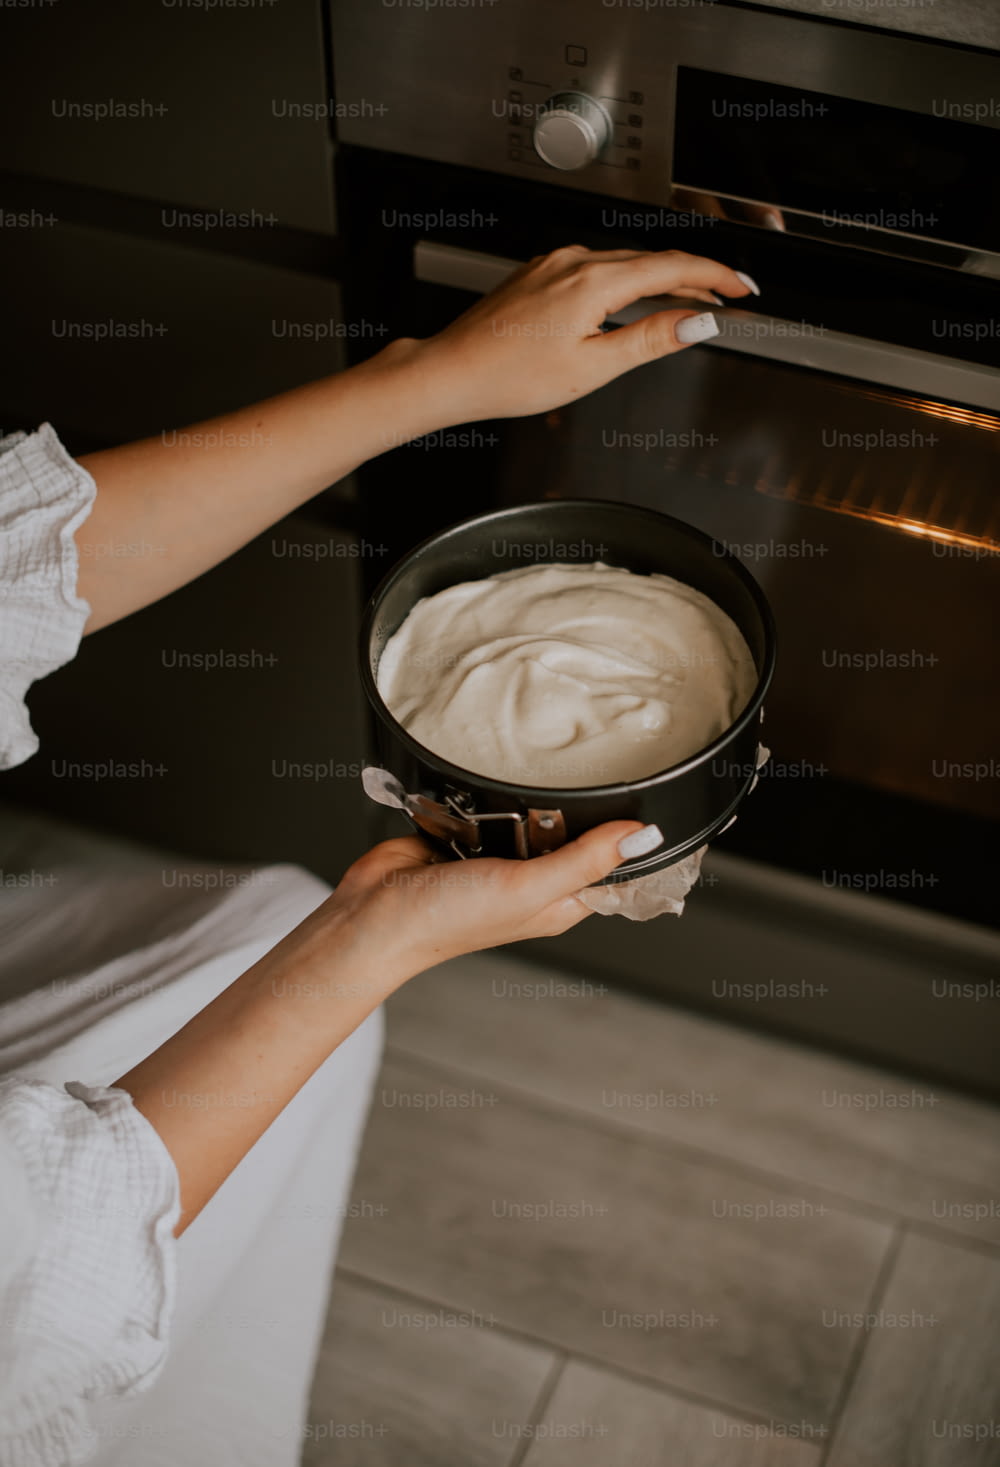 a person holding a pan of food in front of an oven